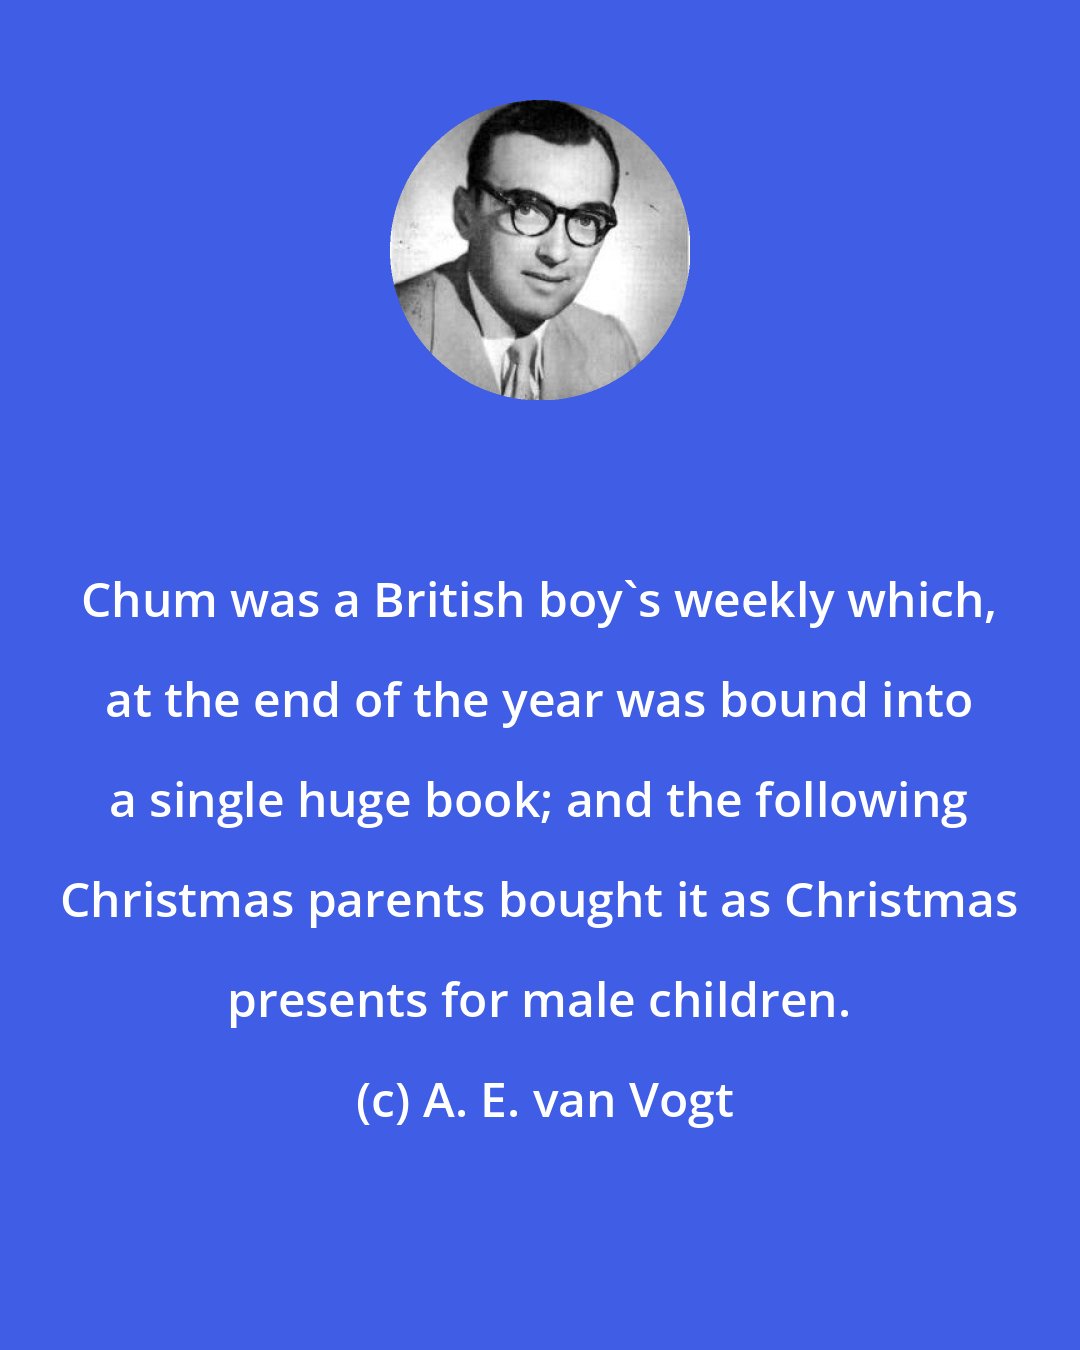 A. E. van Vogt: Chum was a British boy's weekly which, at the end of the year was bound into a single huge book; and the following Christmas parents bought it as Christmas presents for male children.